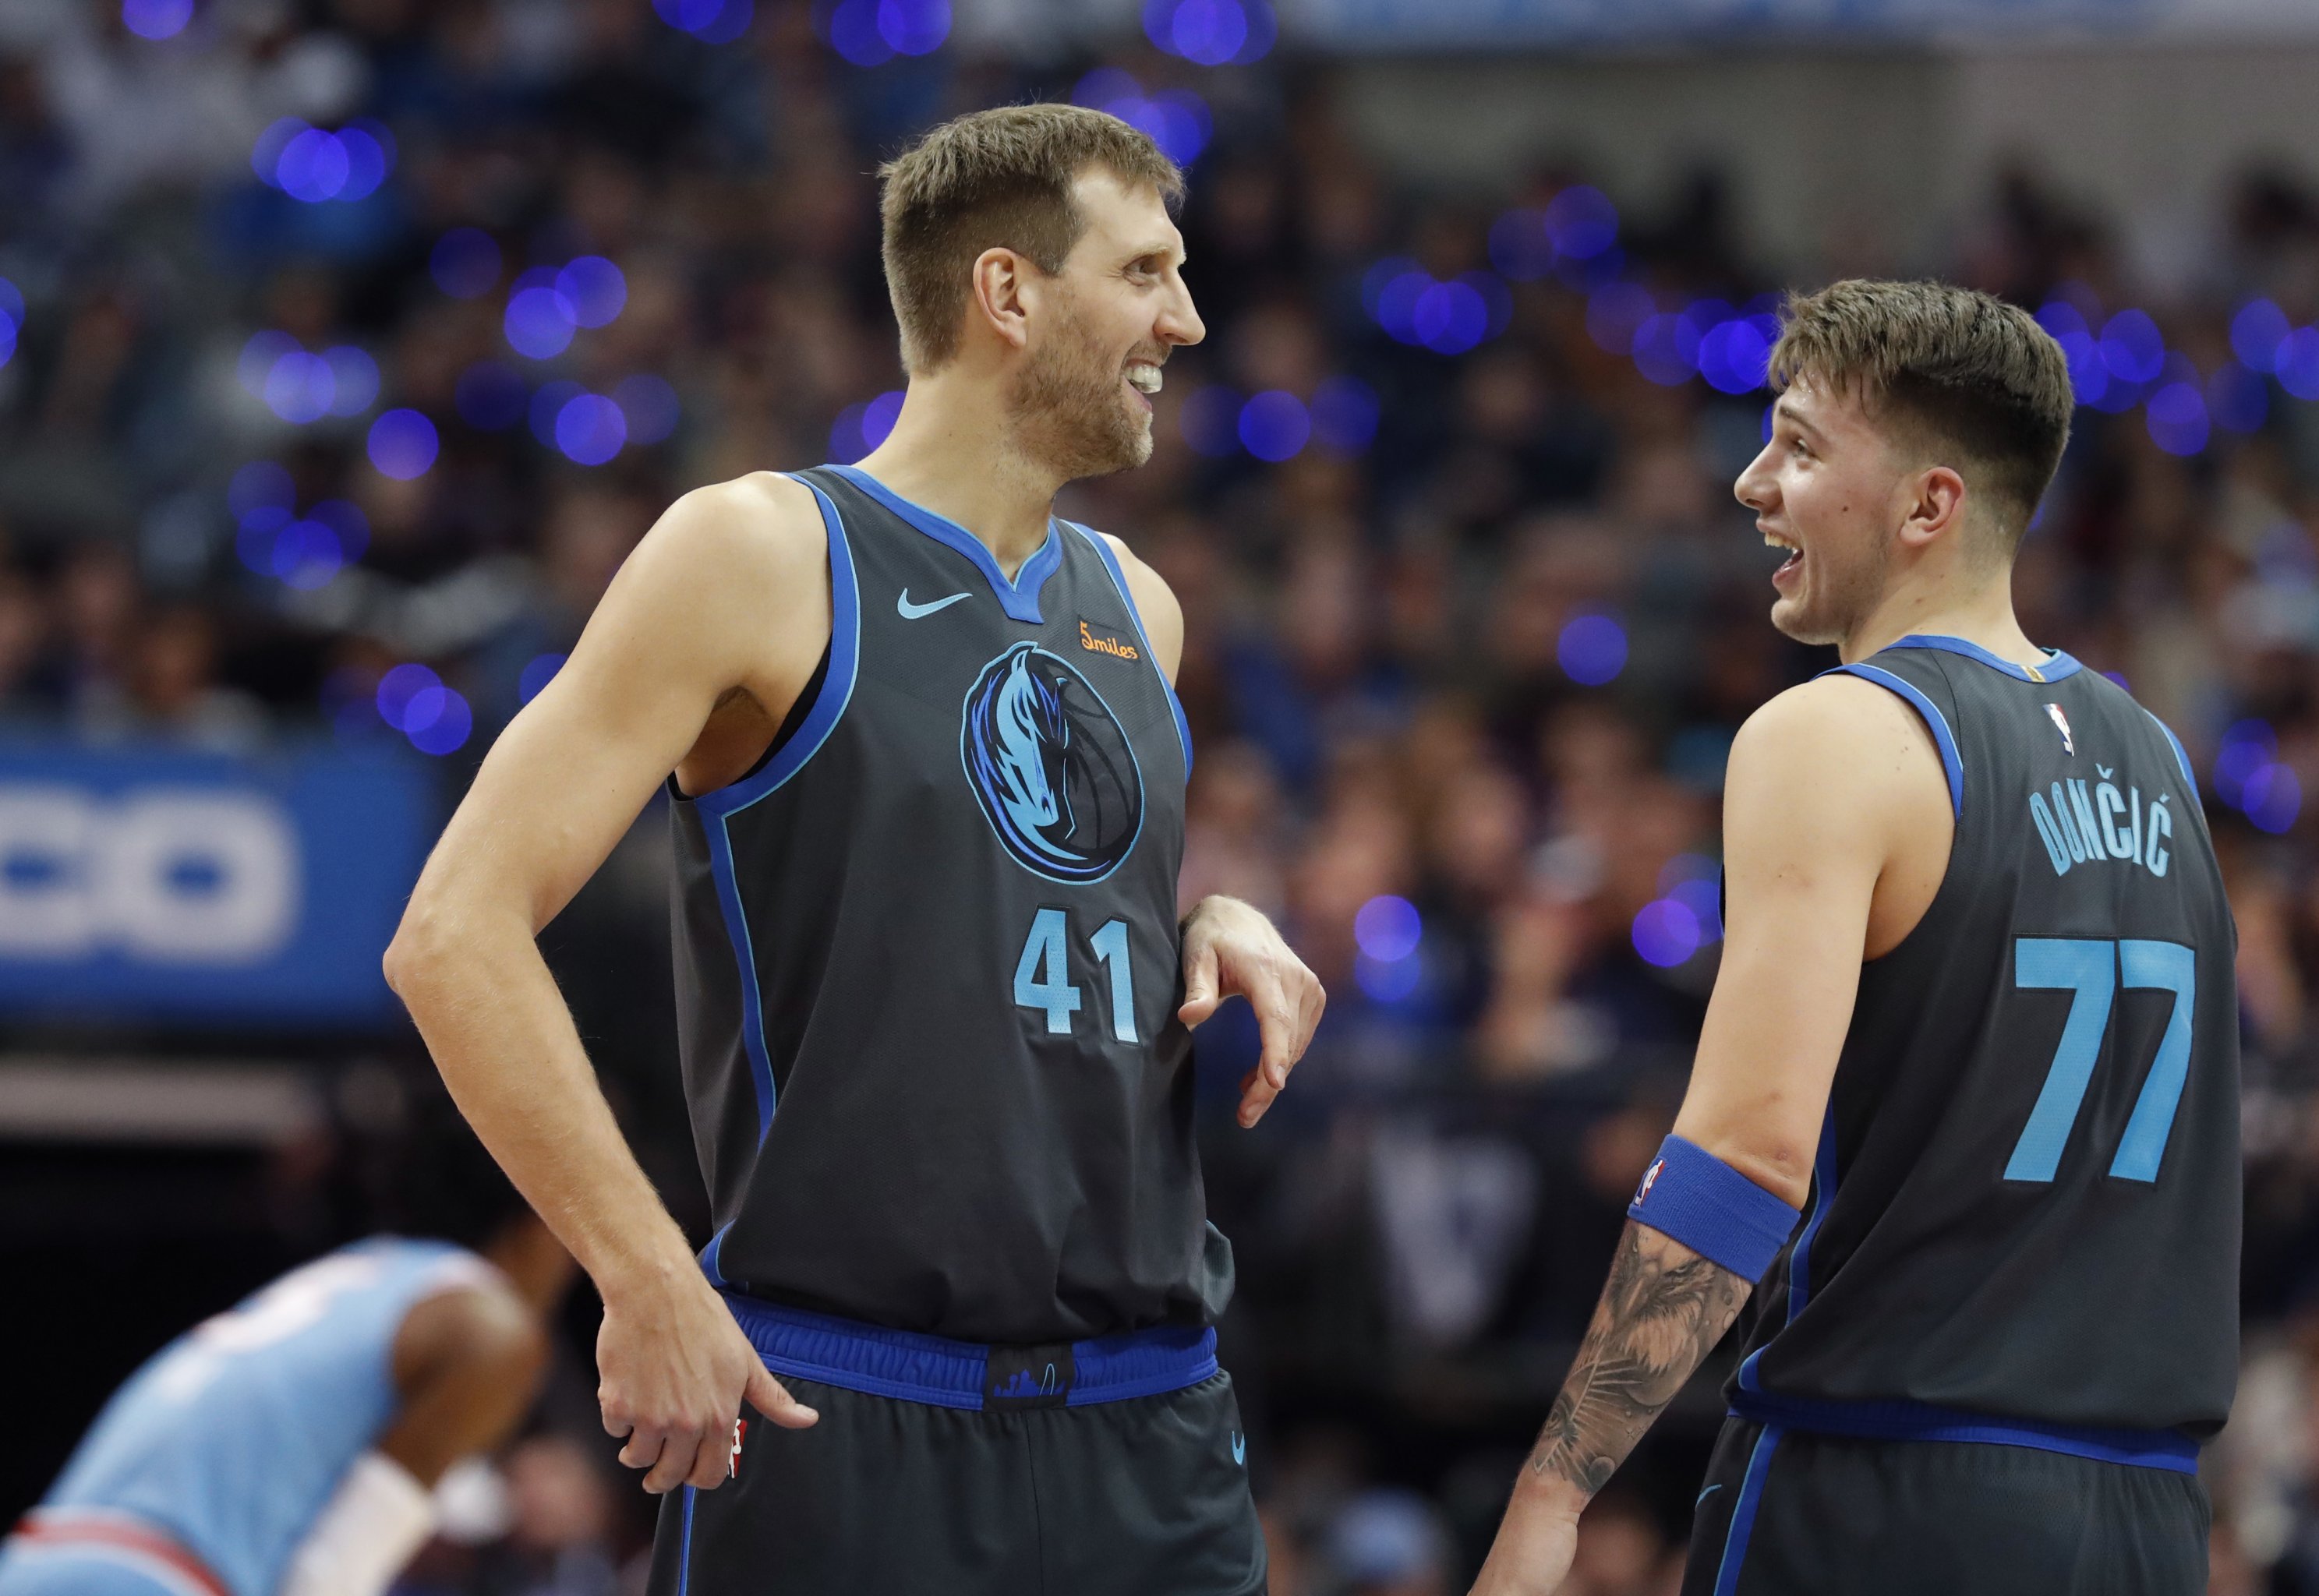 Luka Doncic is the December Western Conference Rookie of the Month